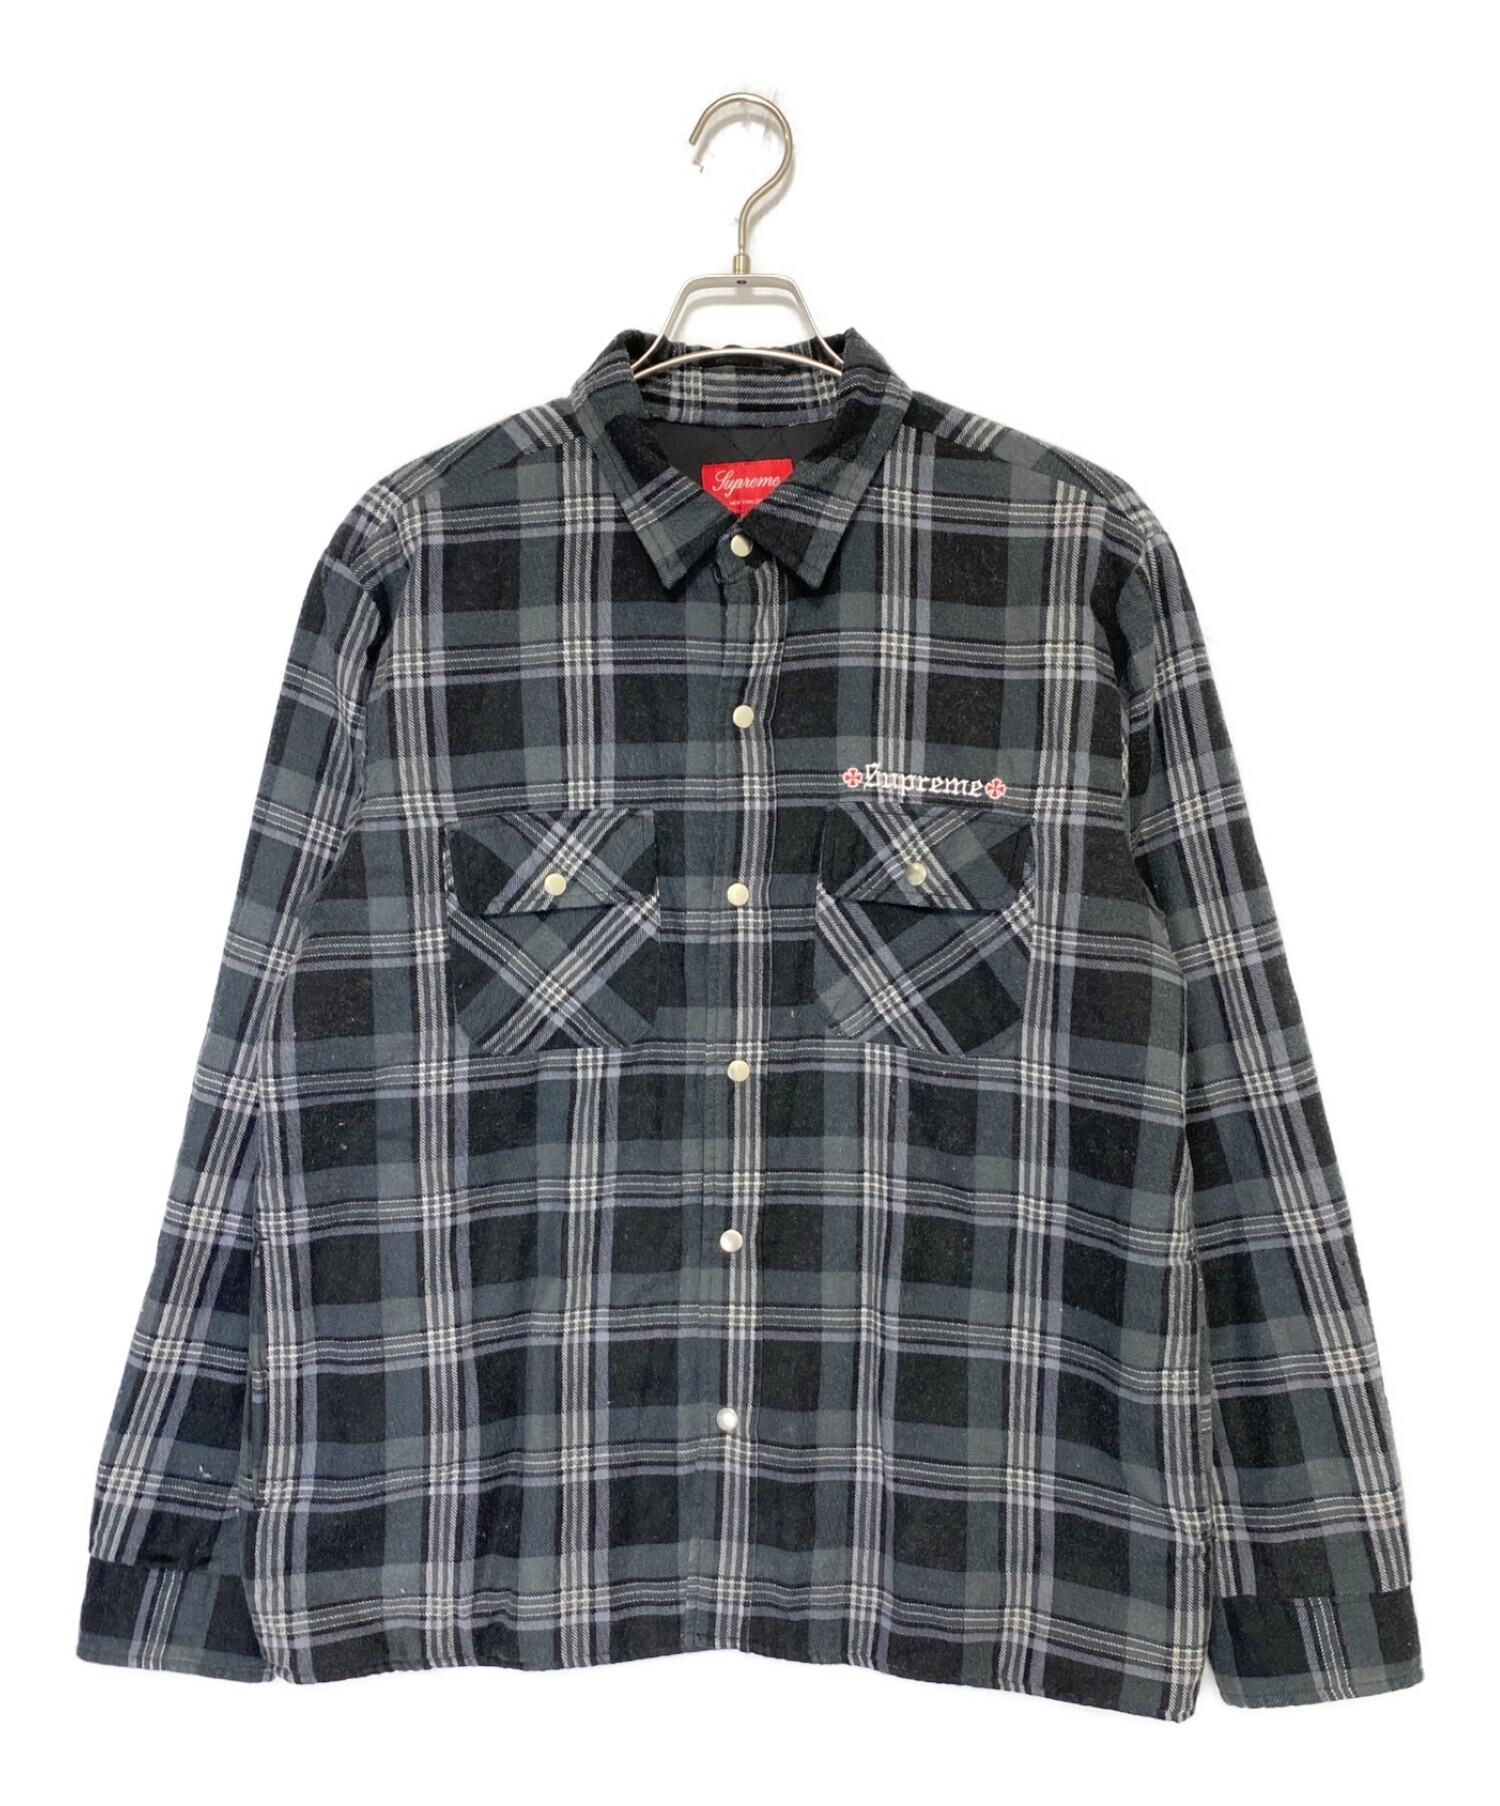 Supreme Independent Quilted FlannelShirt